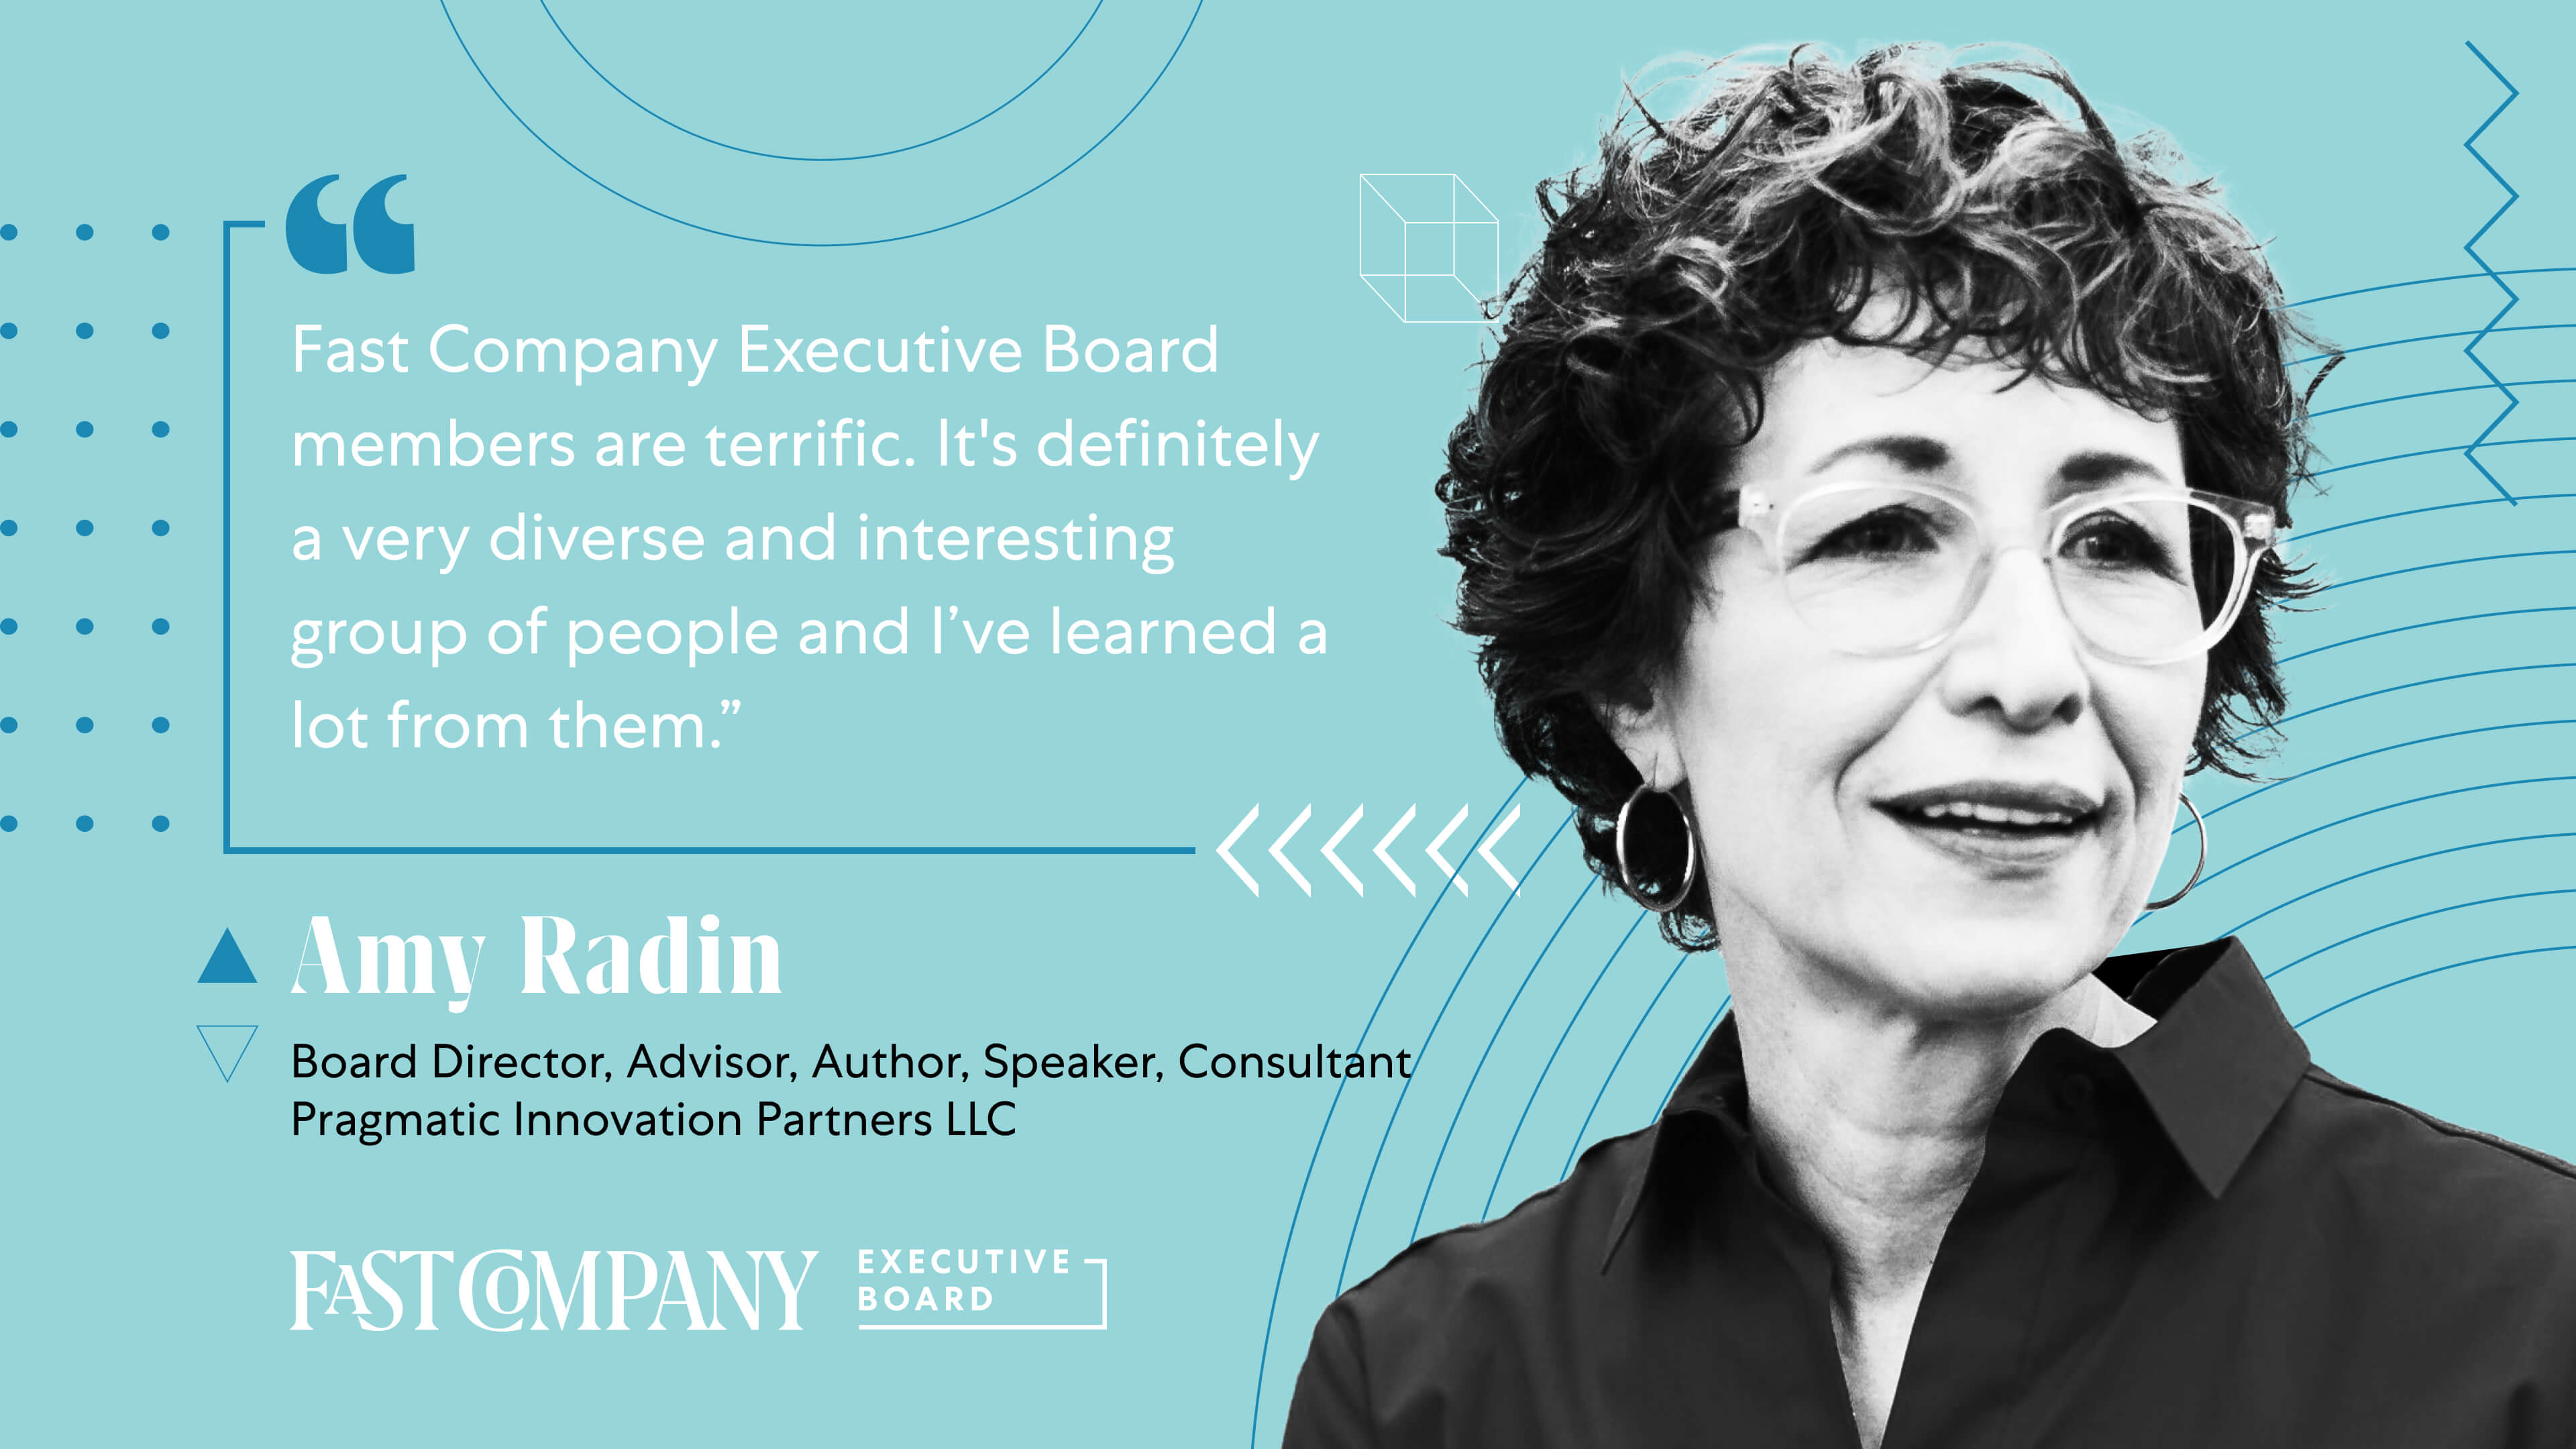 Through Fast Company Executive Board, Amy Radin Shares Her Expertise on Innovation and Leadership